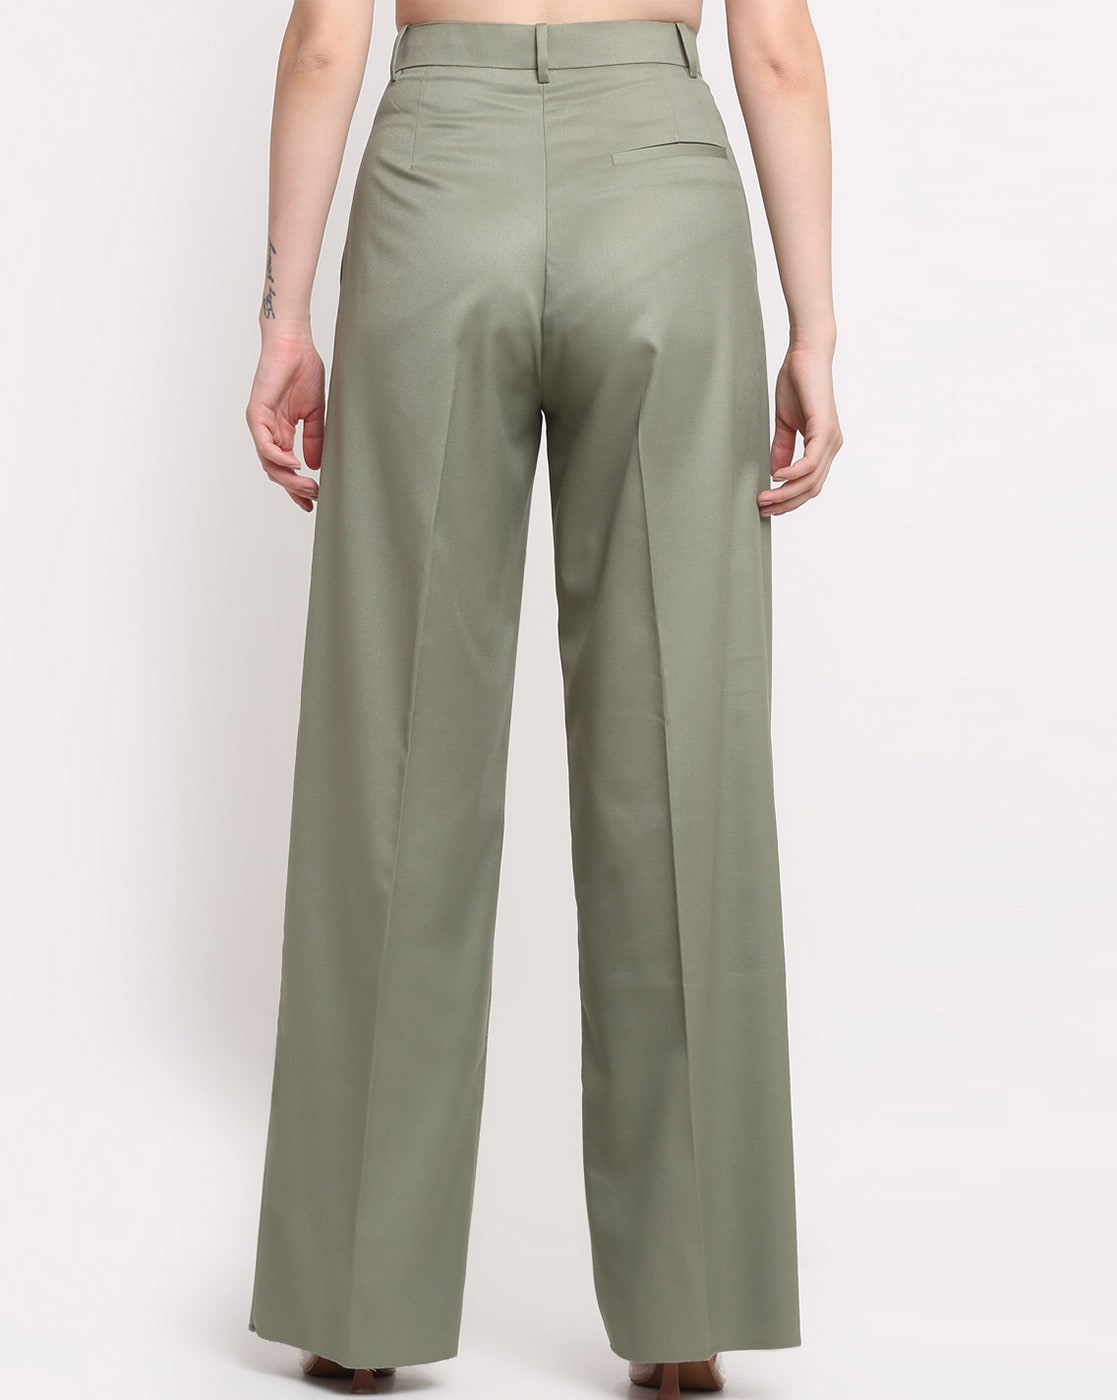 Buy Green Trousers & Pants for Women by Ennoble Online